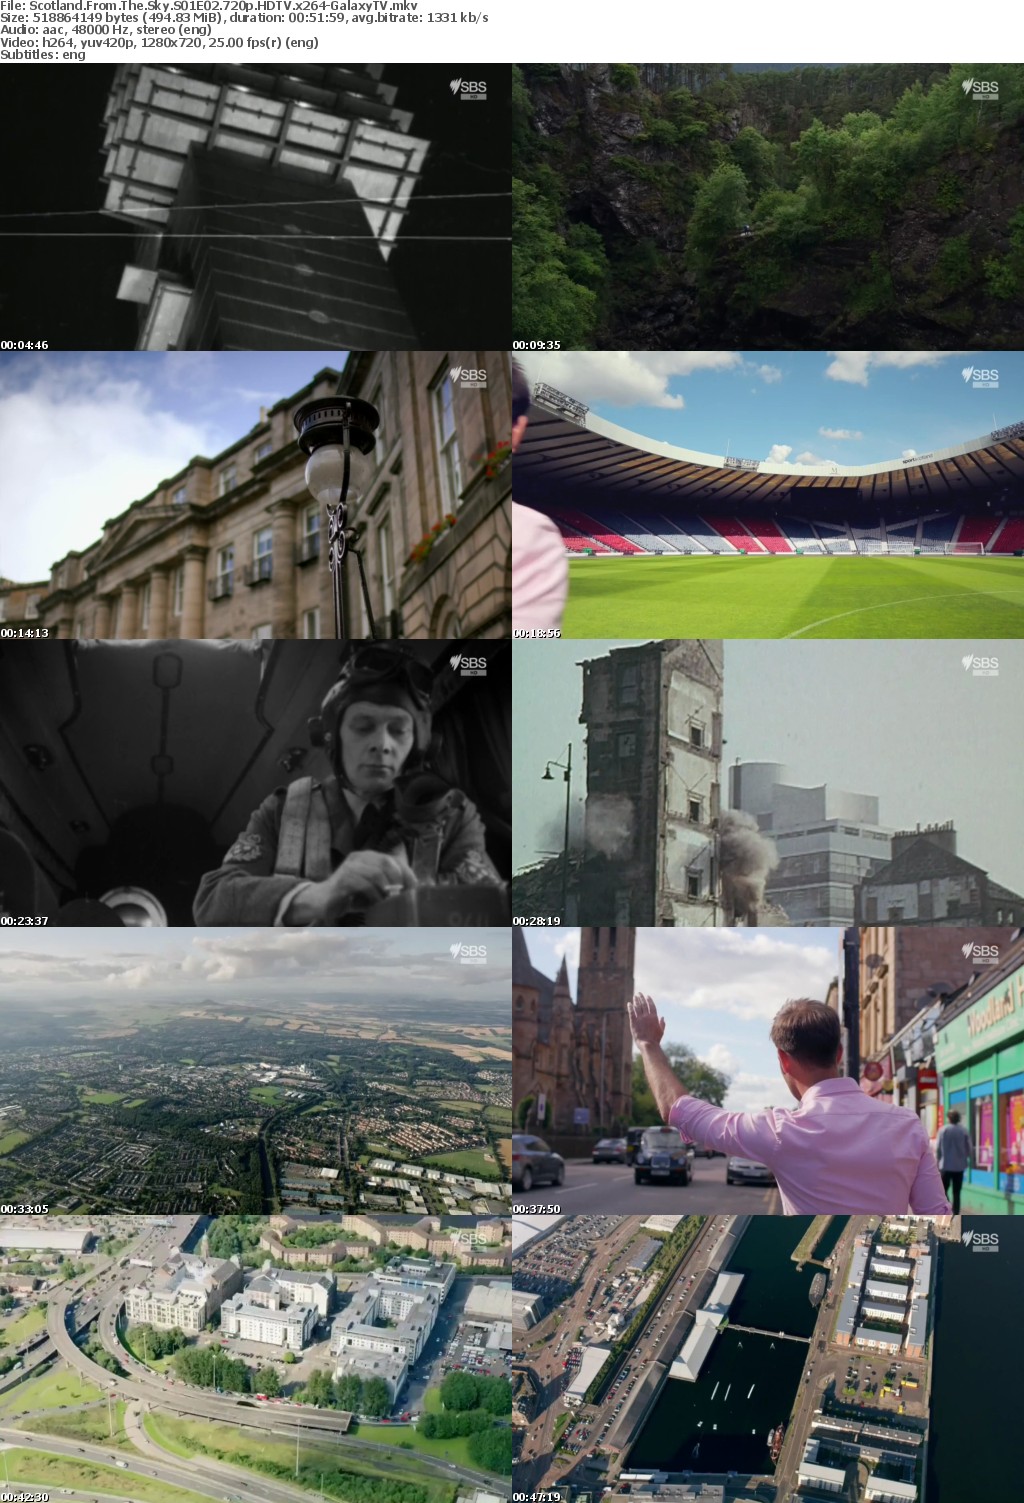 Scotland From The Sky S01 COMPLETE 720p HDTV x264-GalaxyTV